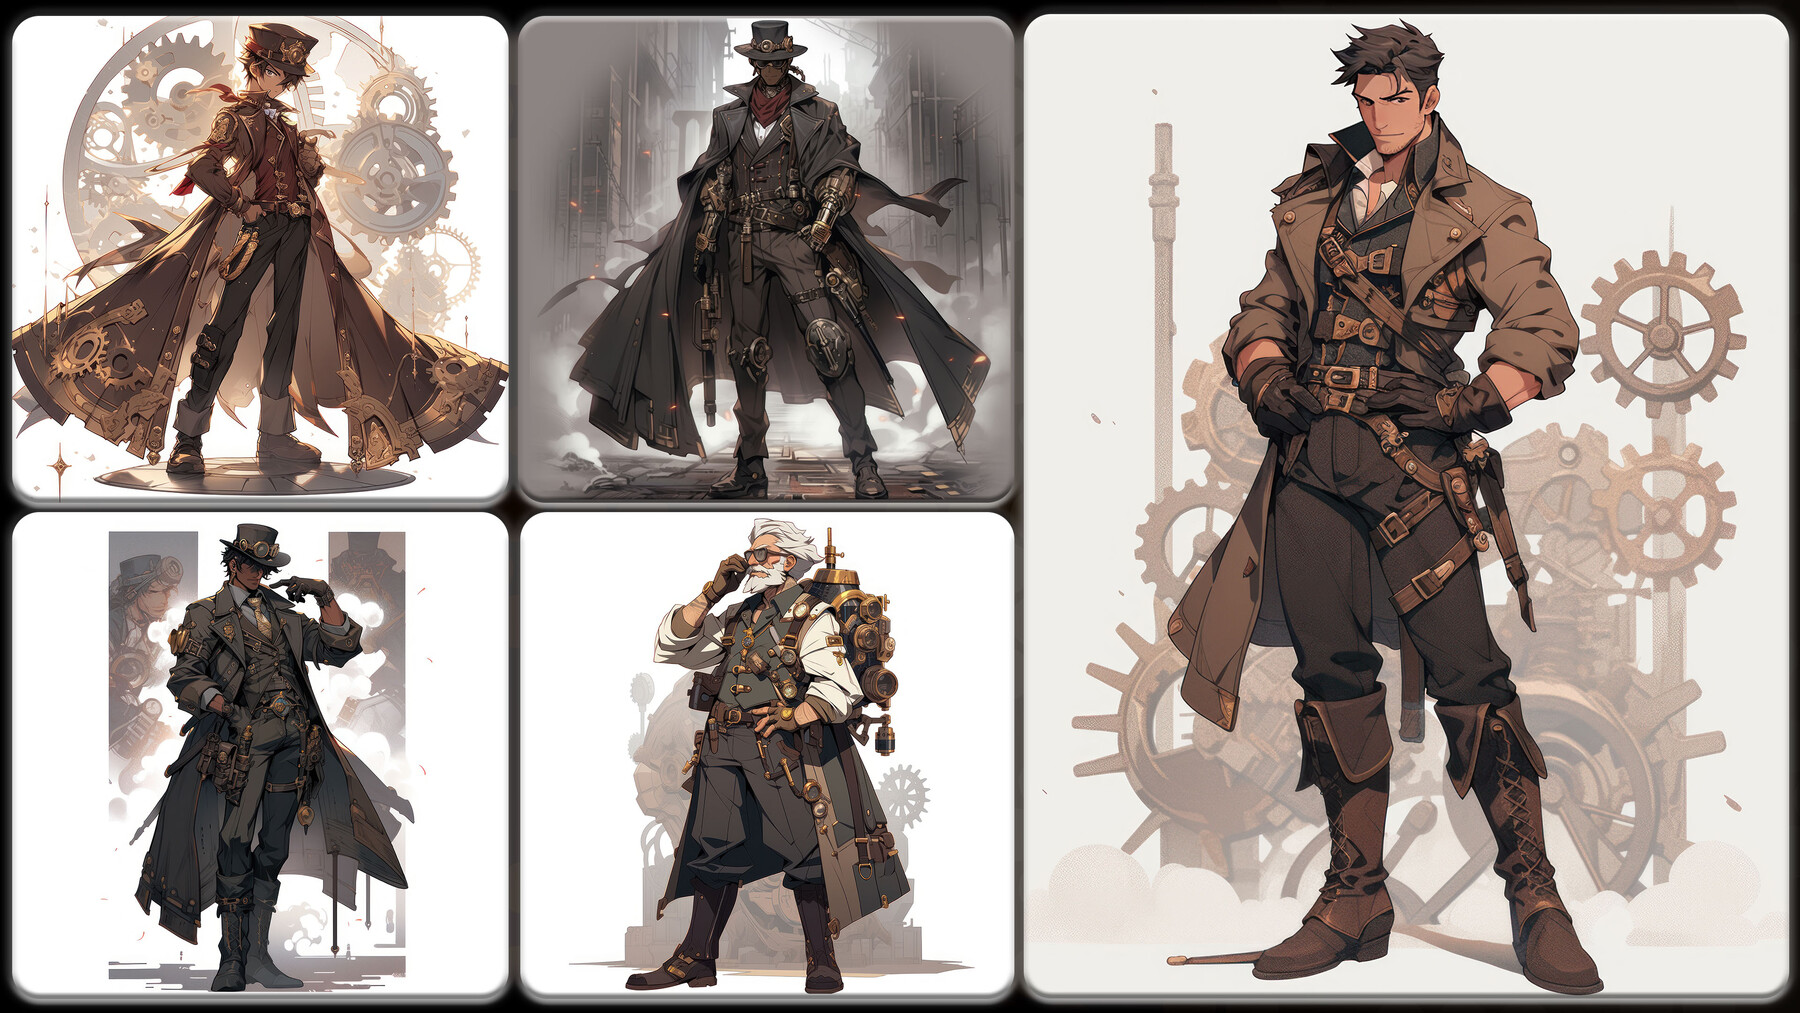 Sprite Sheet: Steampunk Anime Character by Tipping Toast Media on Dribbble